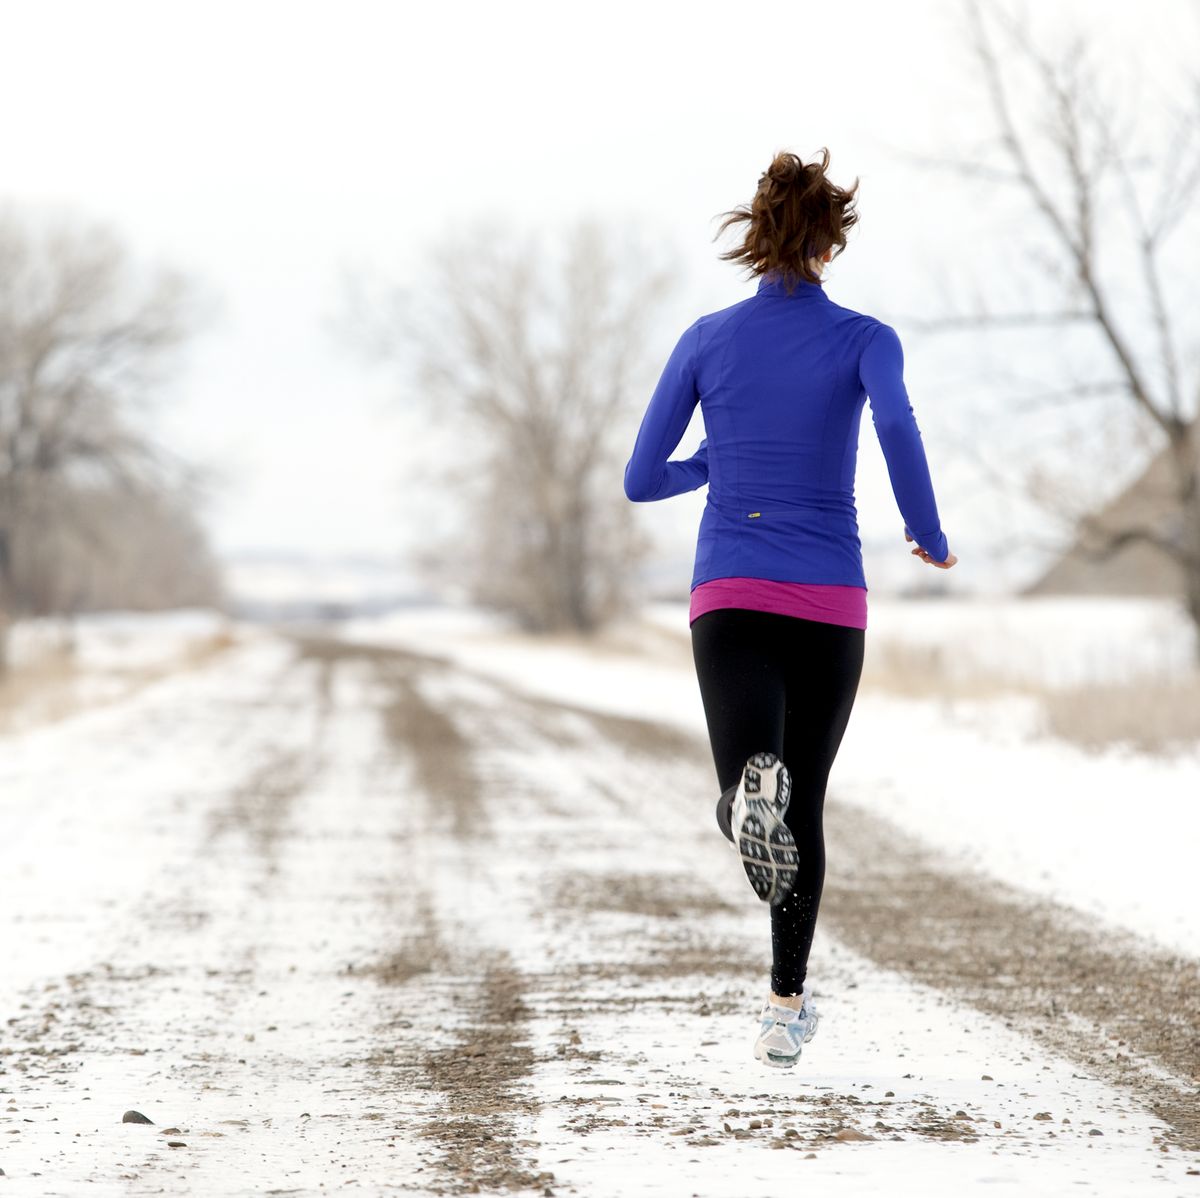 an athletic woman jogging in the winter fasted cardio